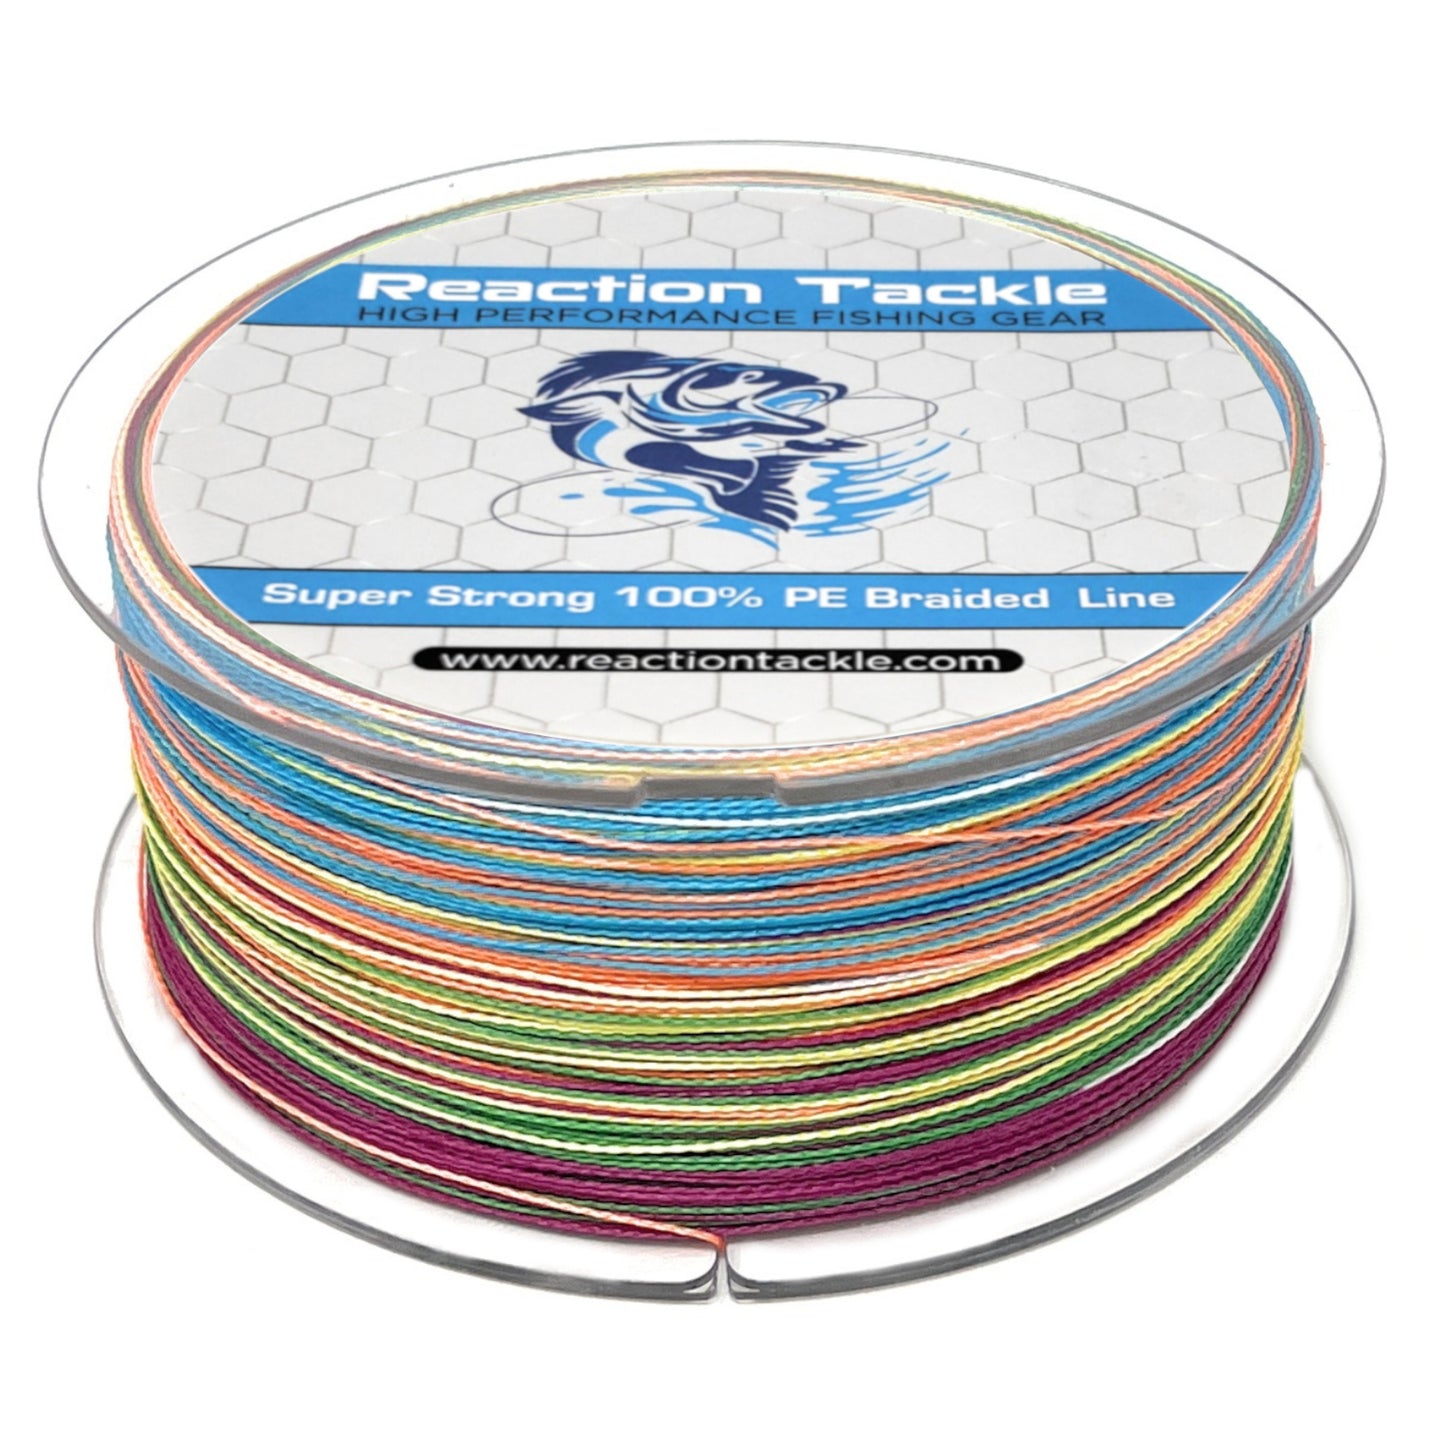 Reaction Tackle Braided Fishing Line Gray 40LB 300yd, Braided Line -   Canada